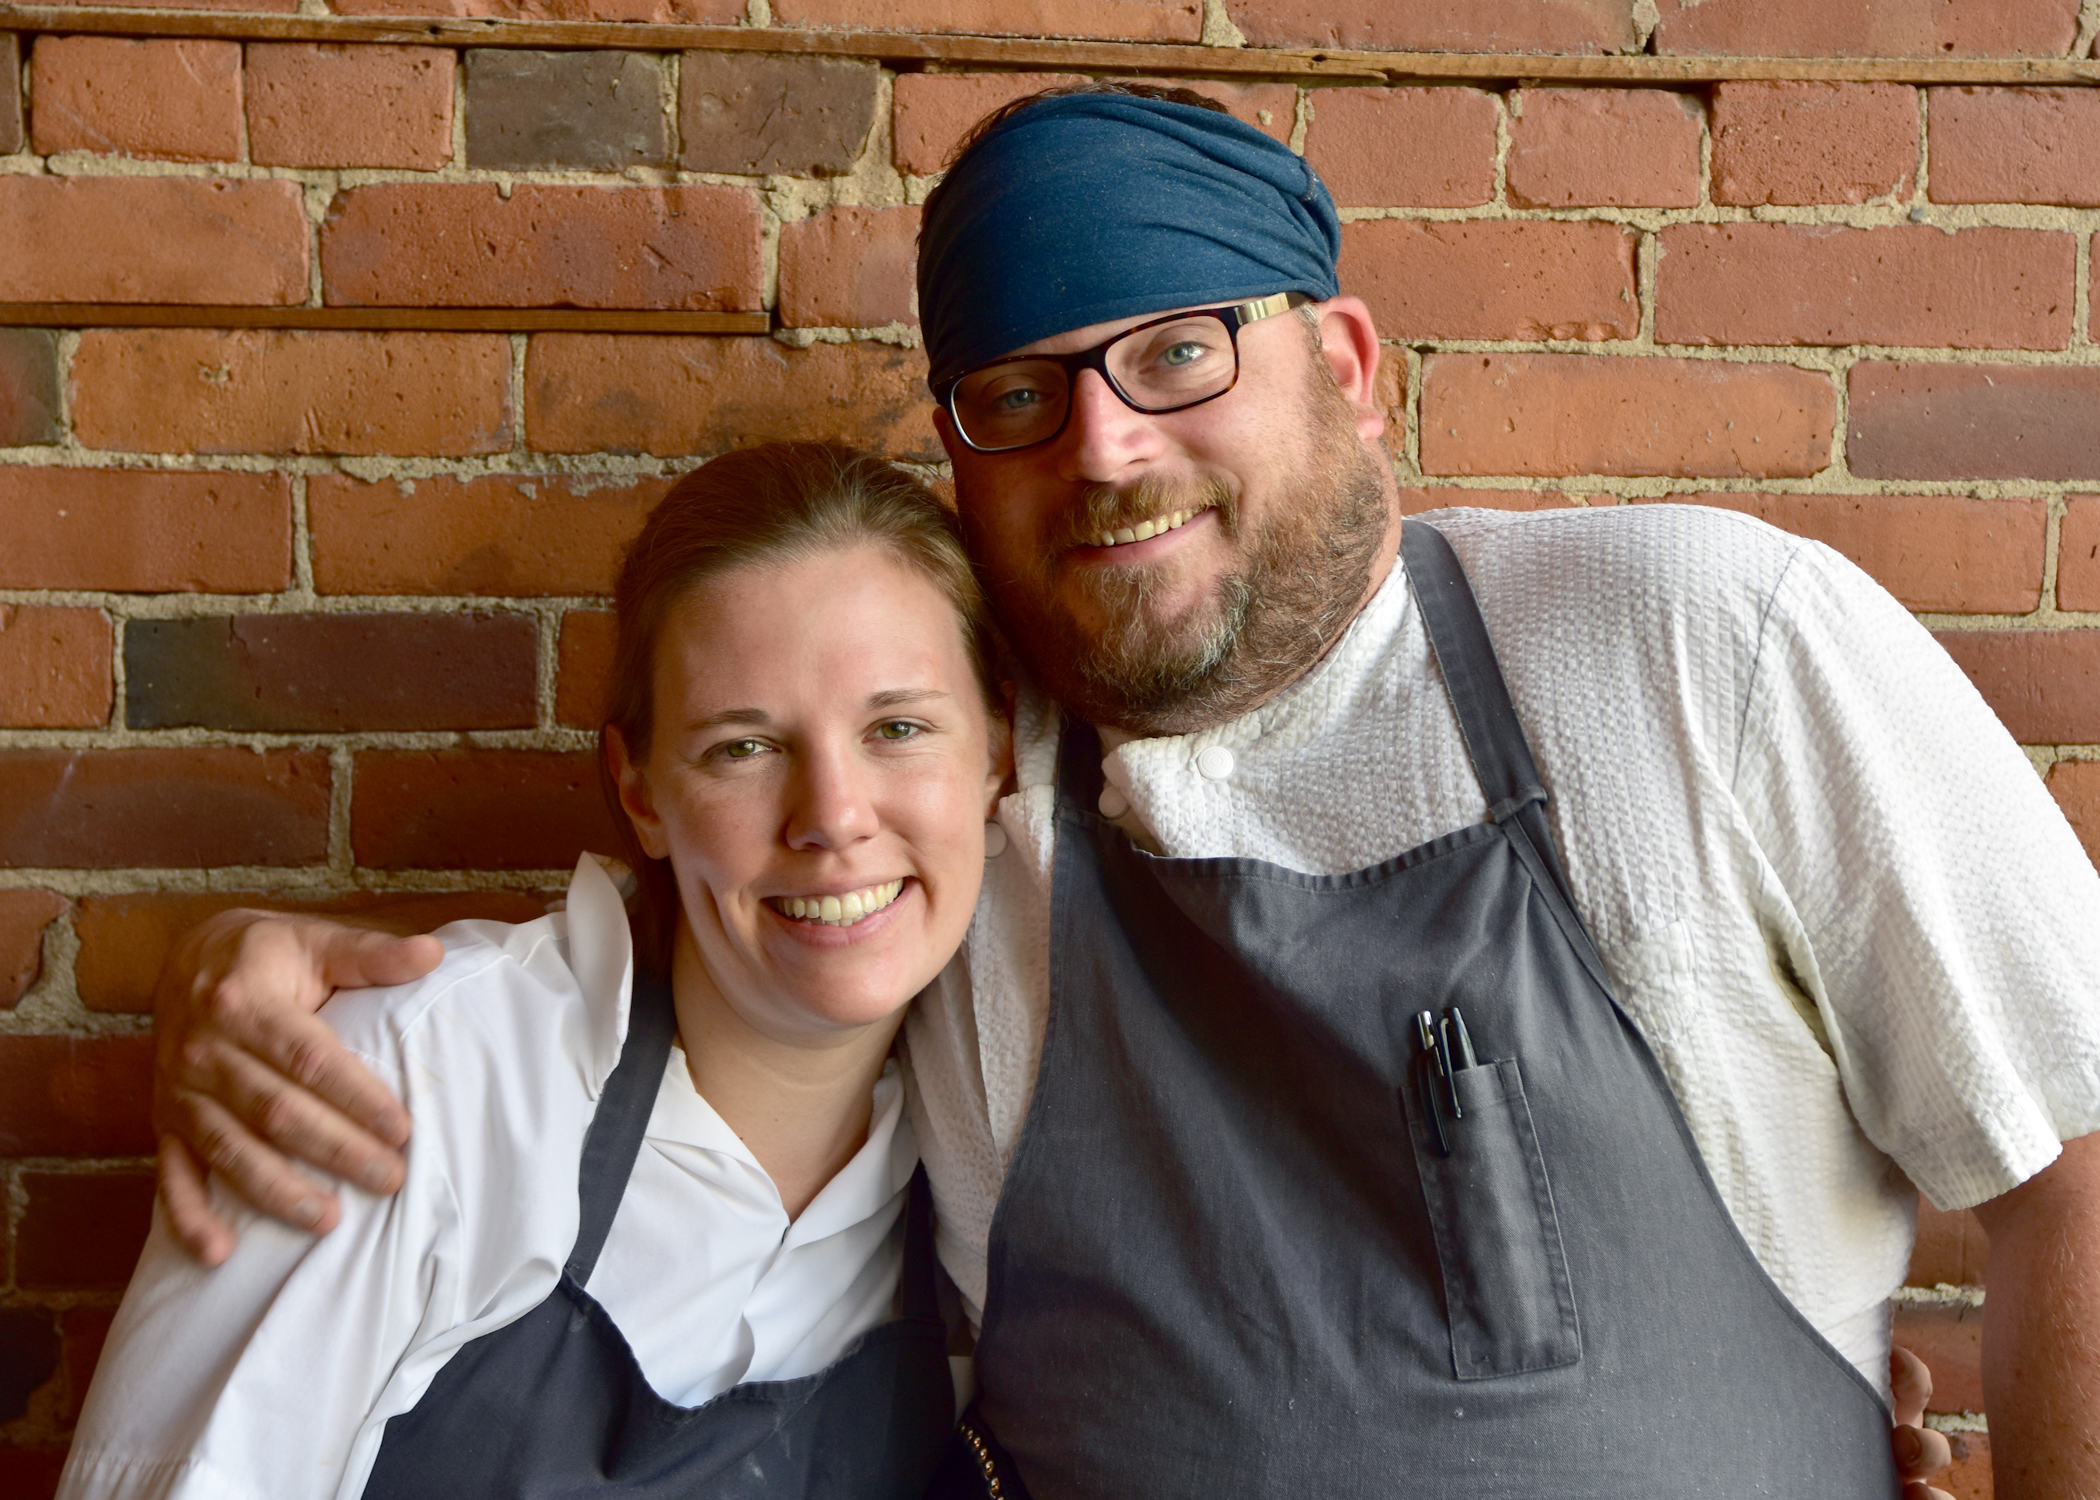 Award-winning husband and wife chef team to co-chair Dining Out For Life event